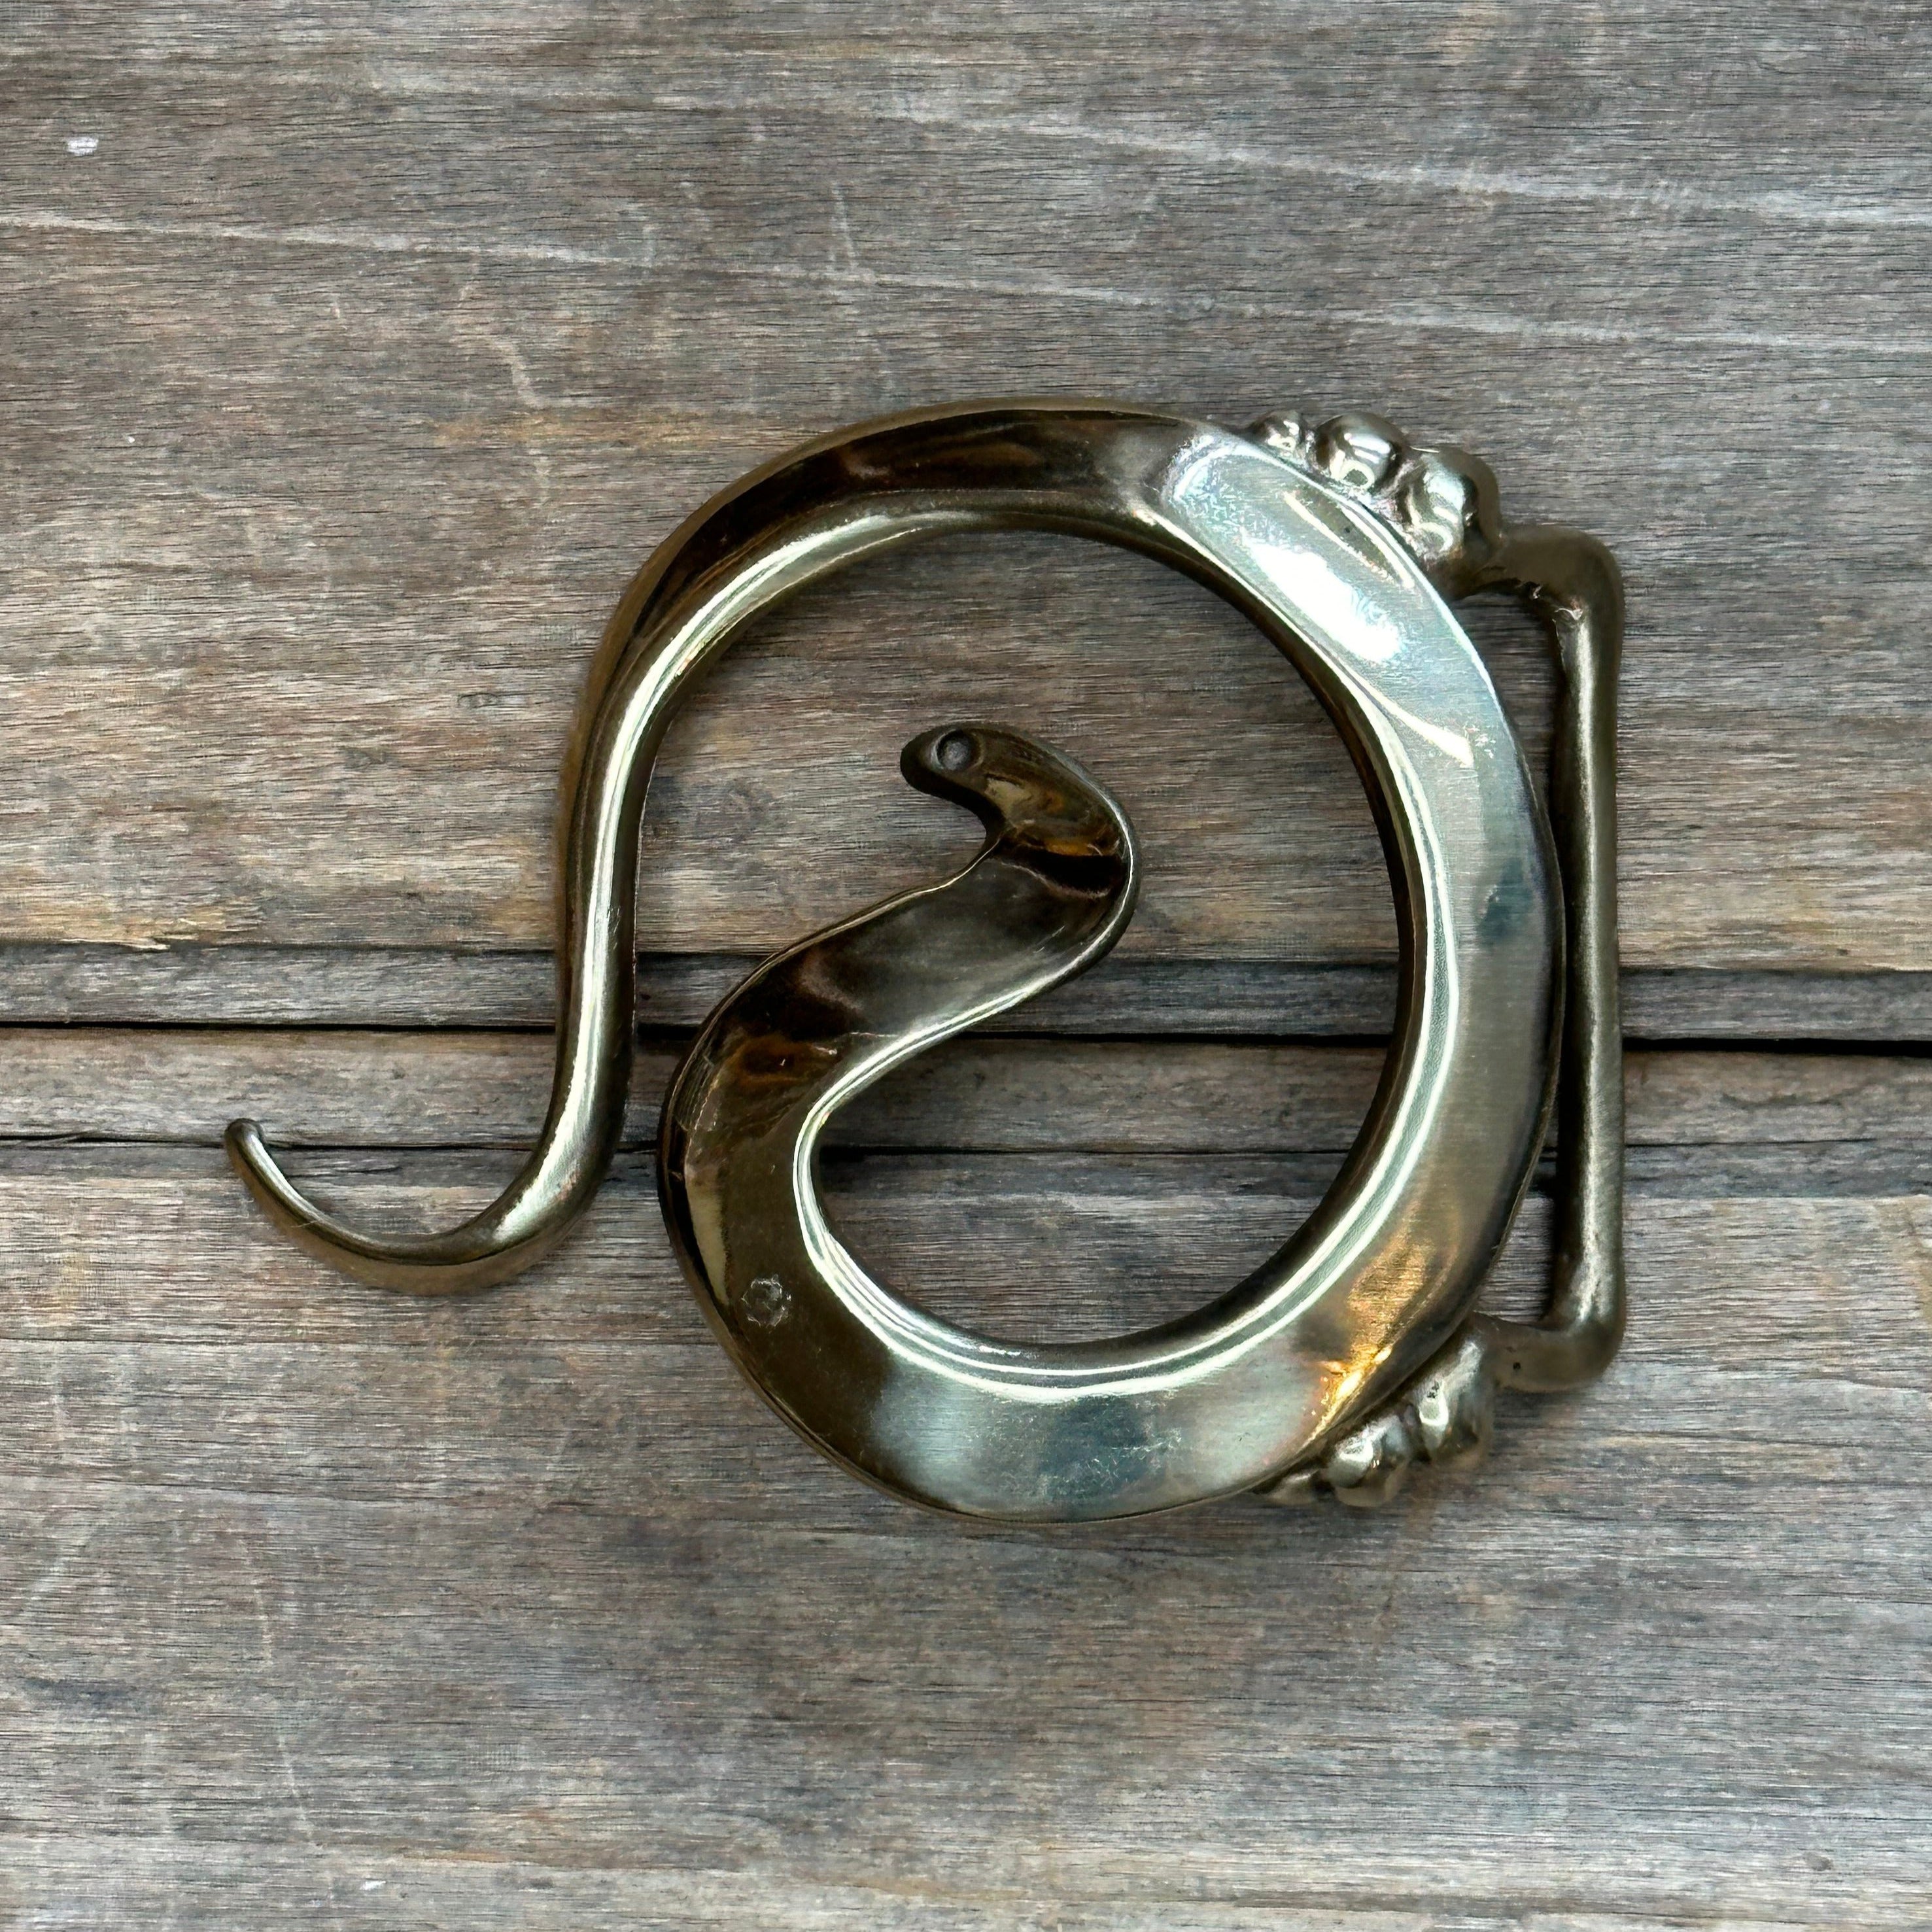 This is a brass buckle with a golden tone.